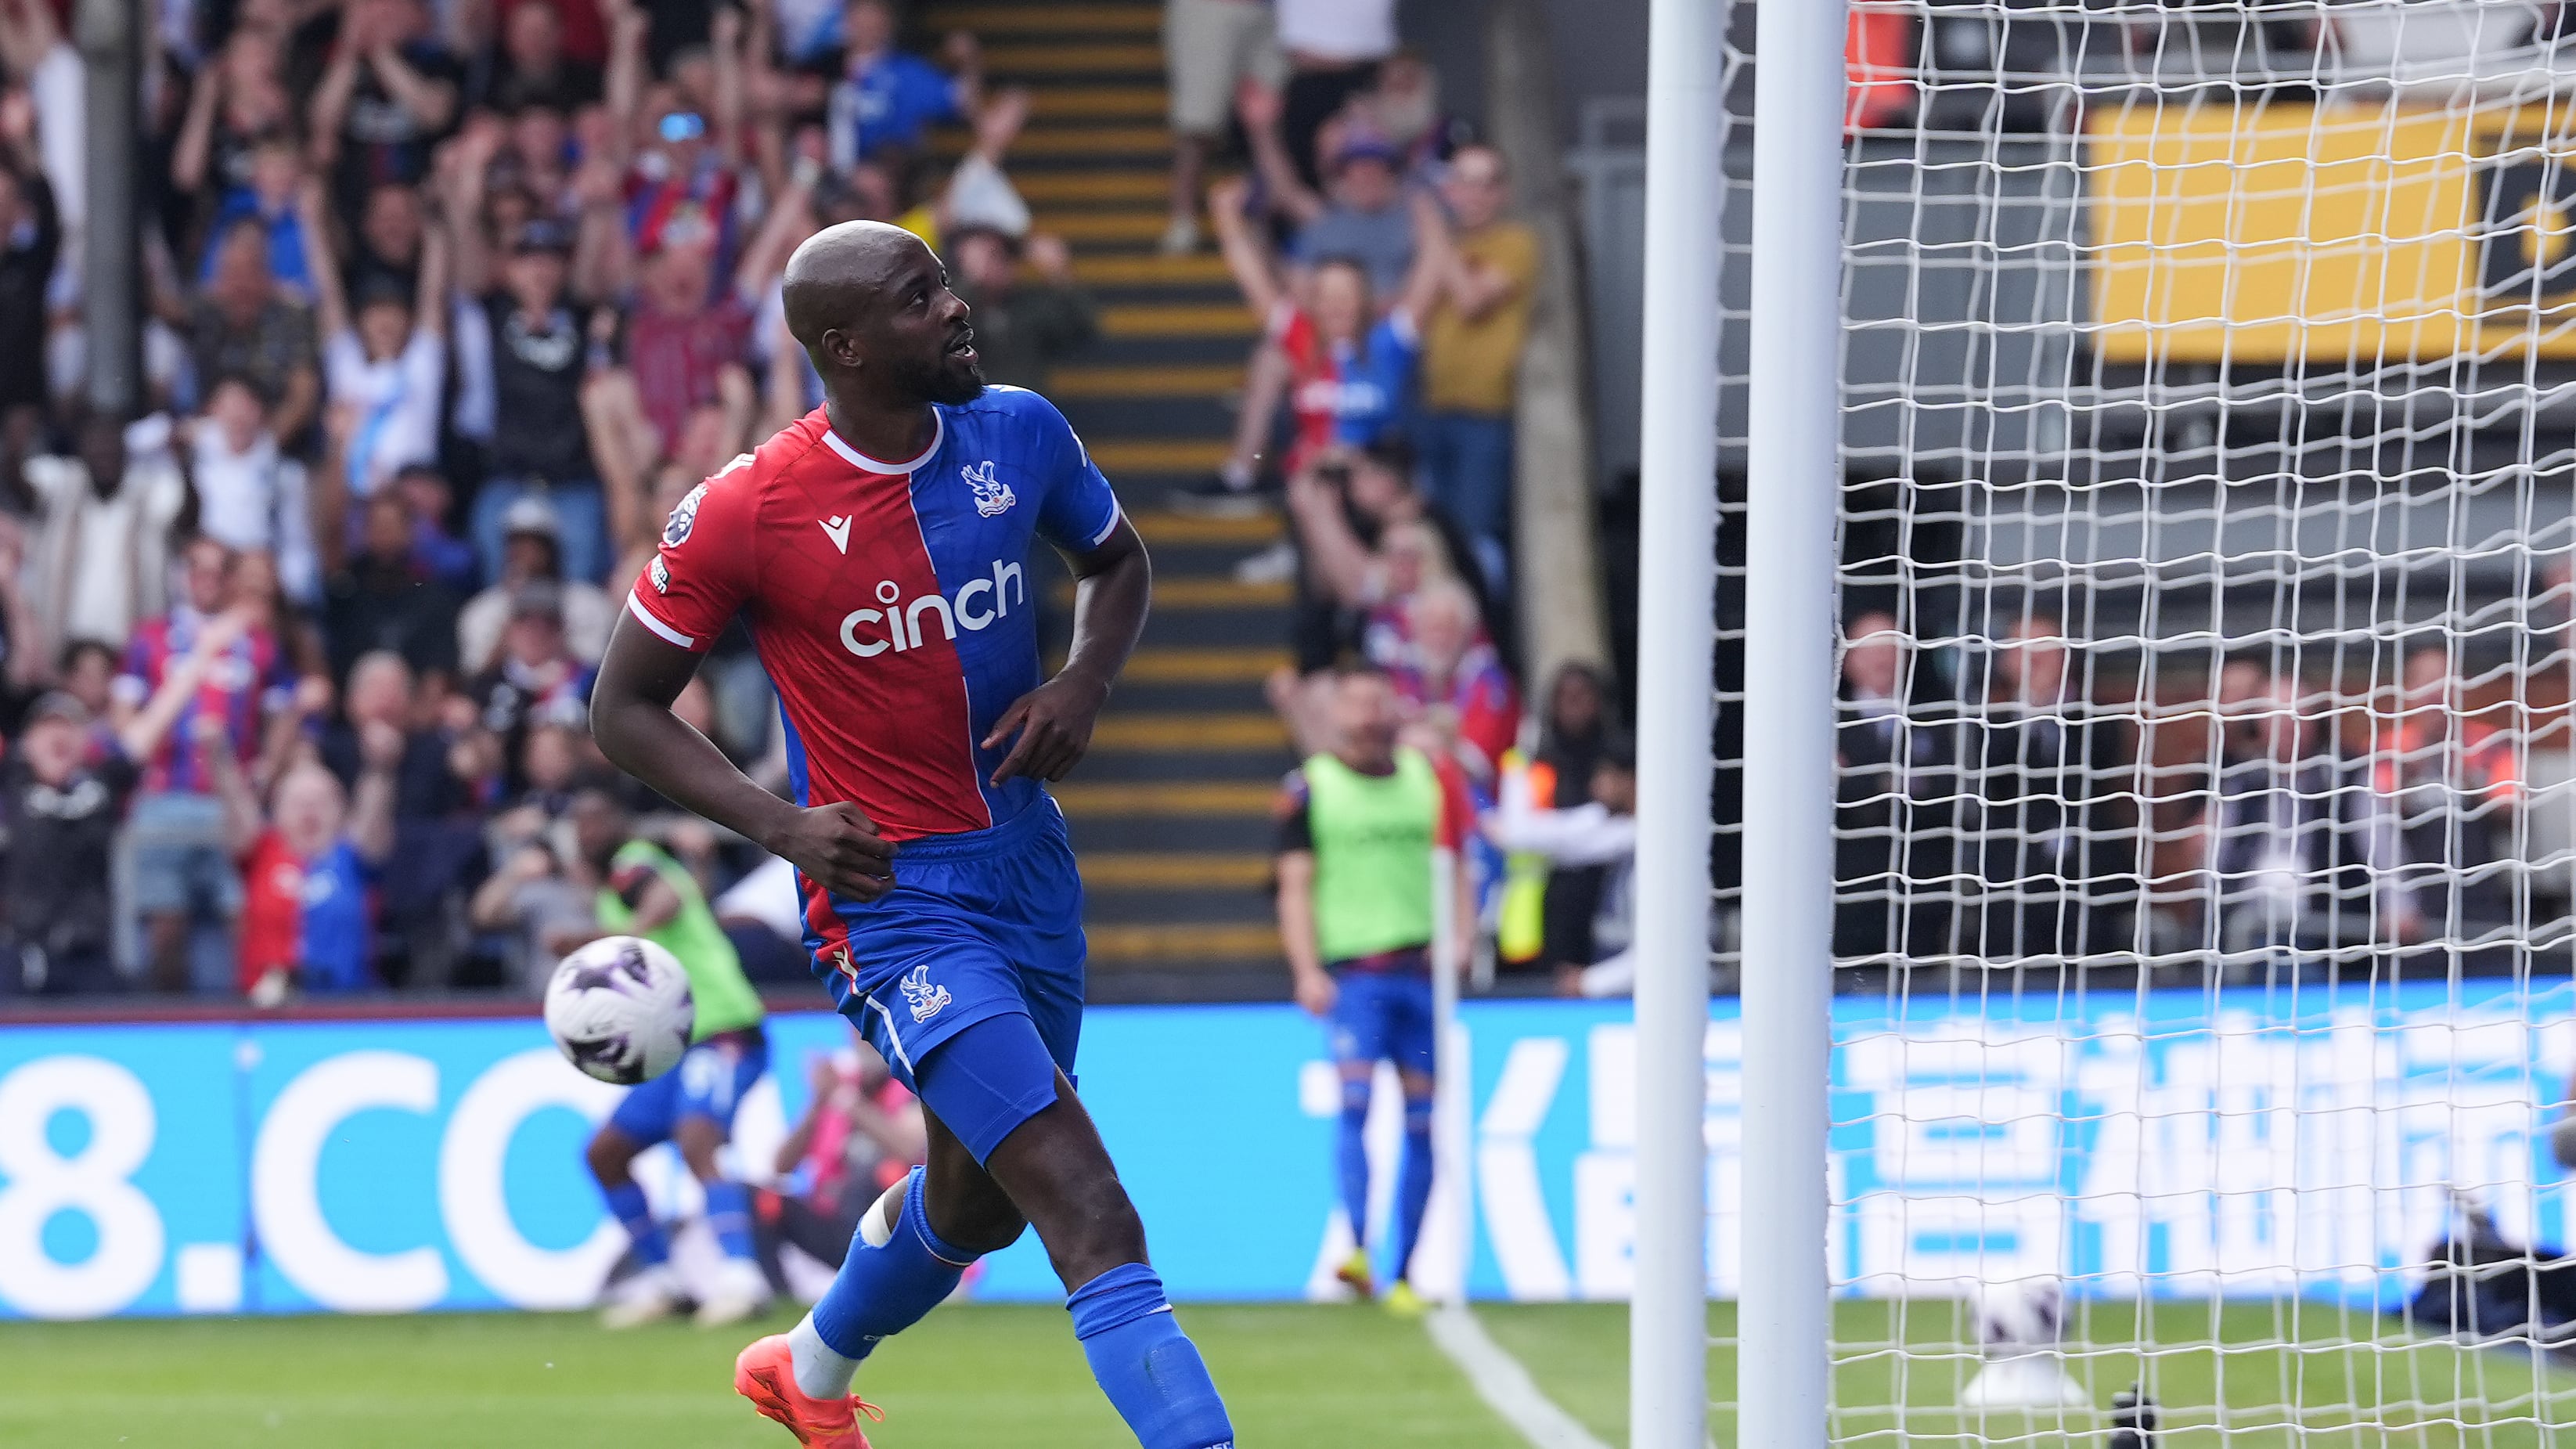 Jean-Philippe Mateta boosted Crystal Palace to victory over Aston Villa